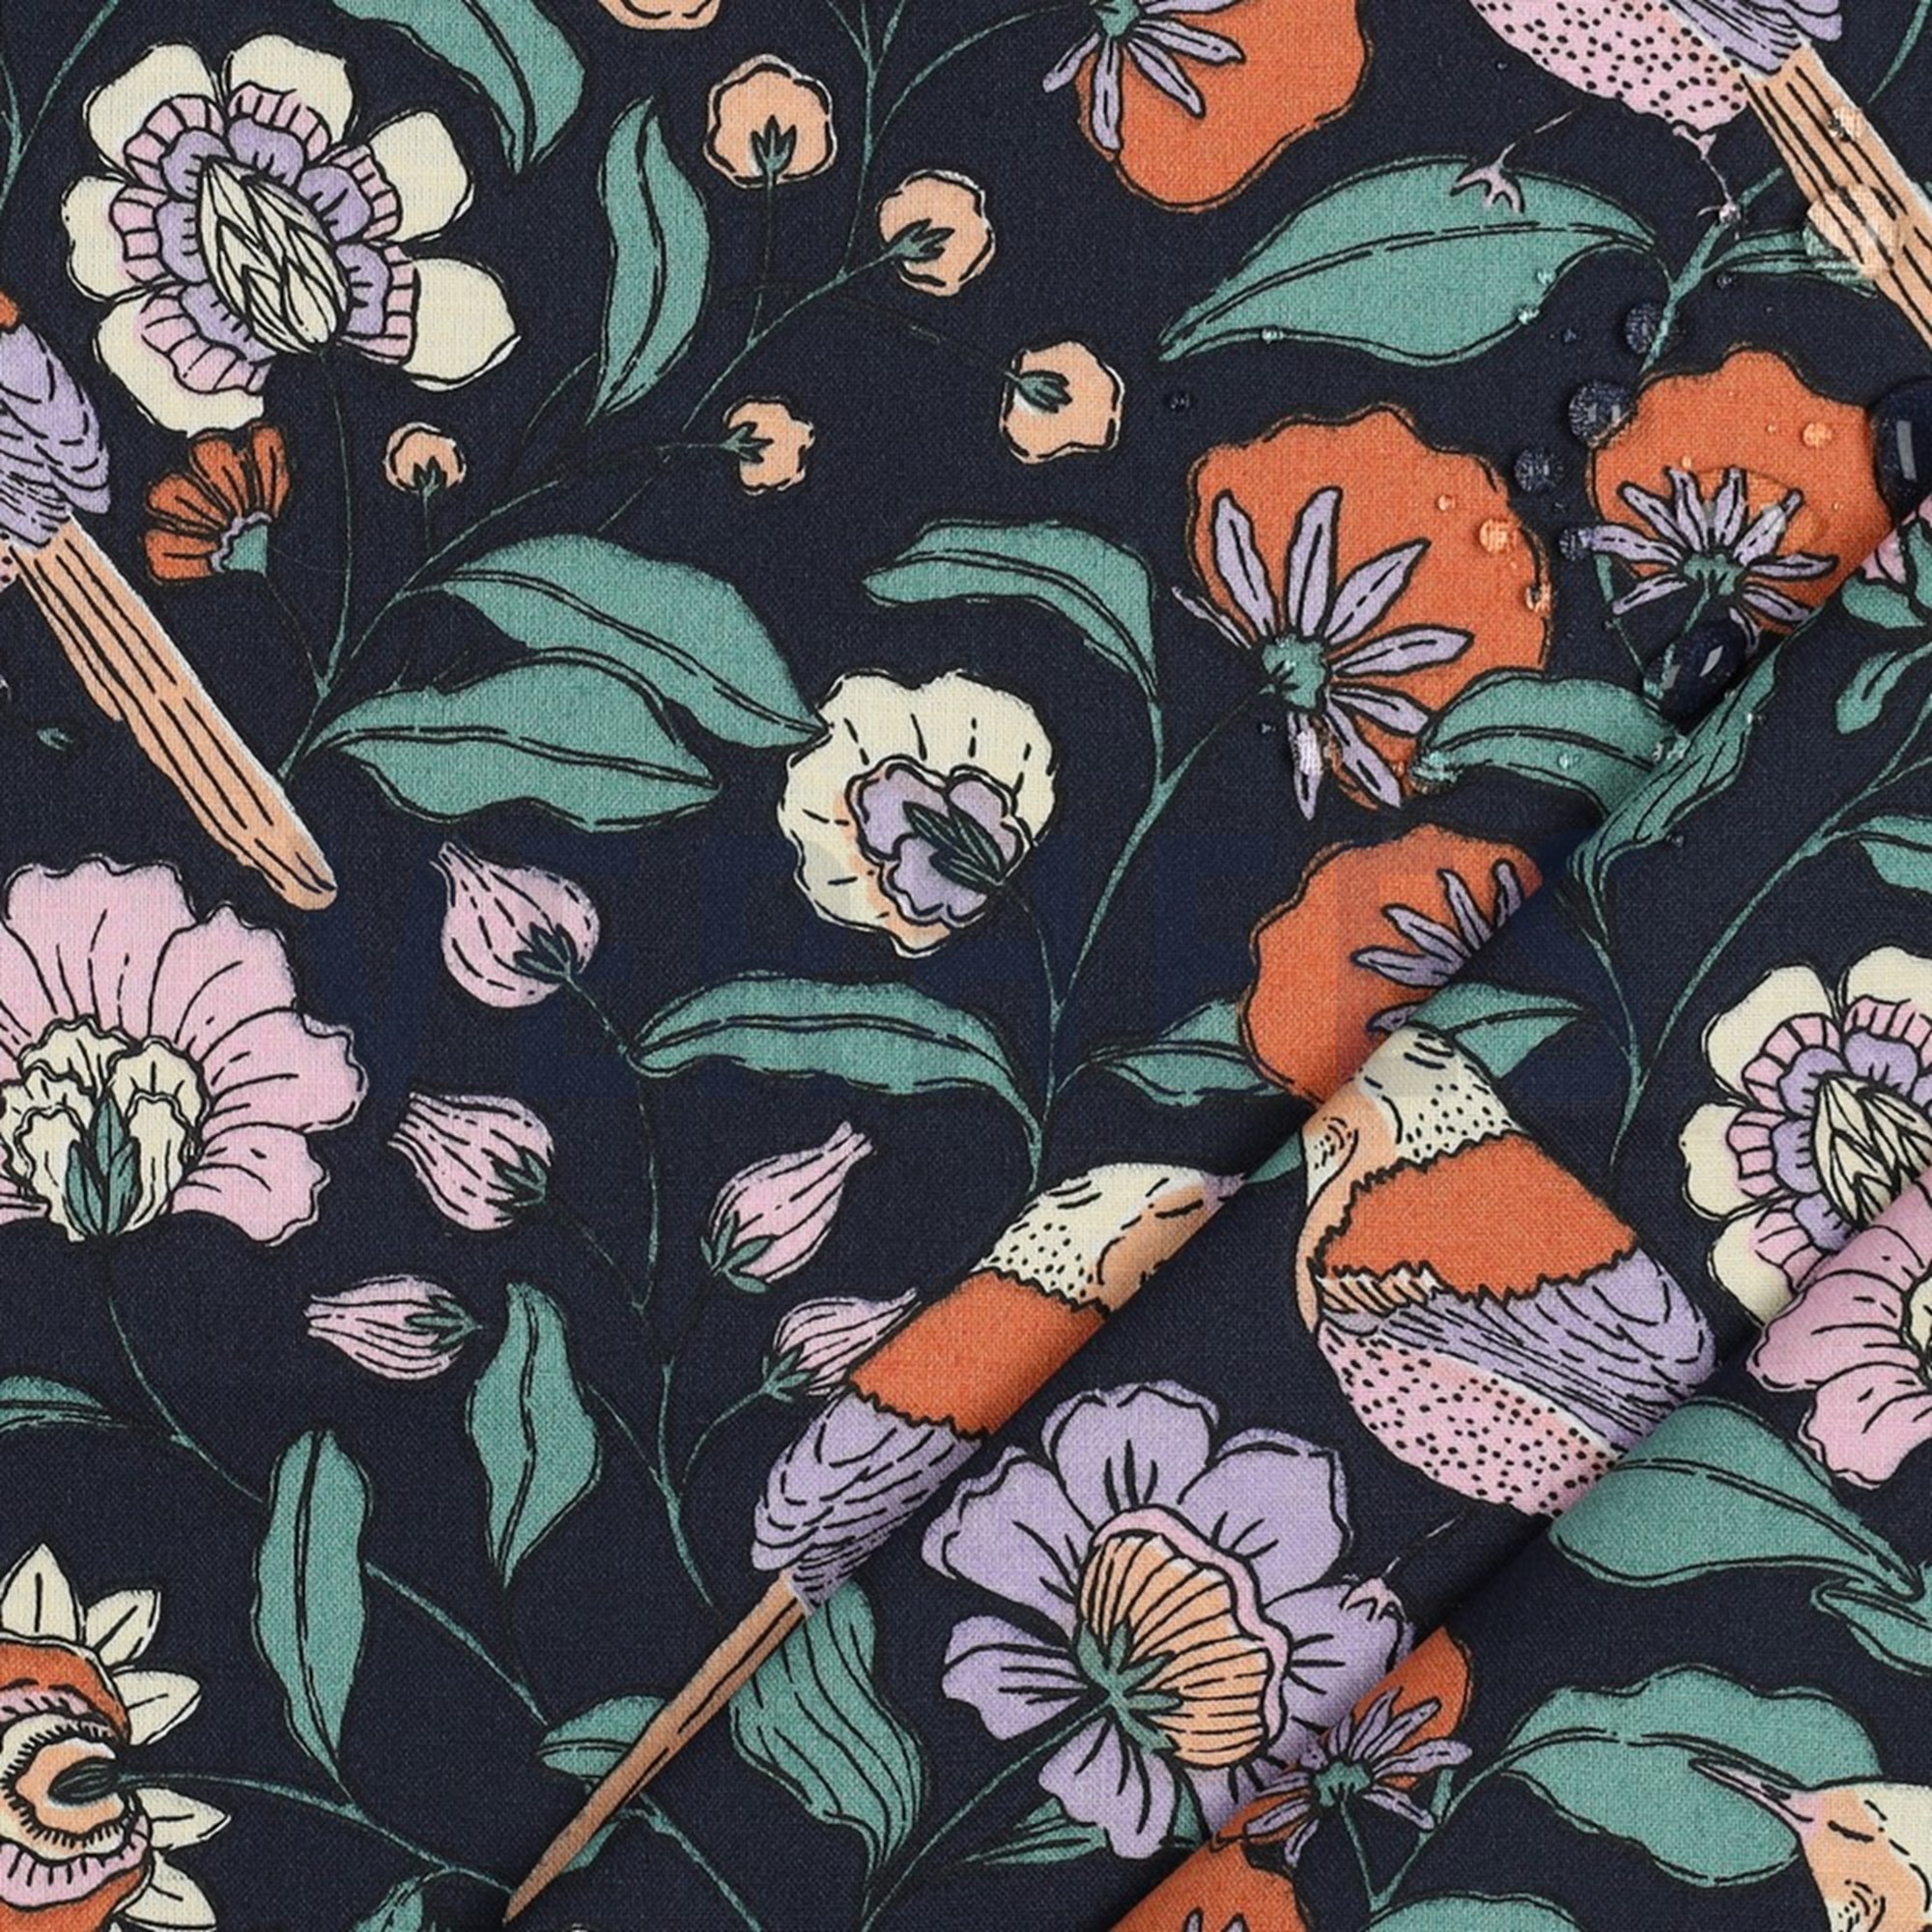 COATED COTTON FLOWERS NAVY (high resolution) #3